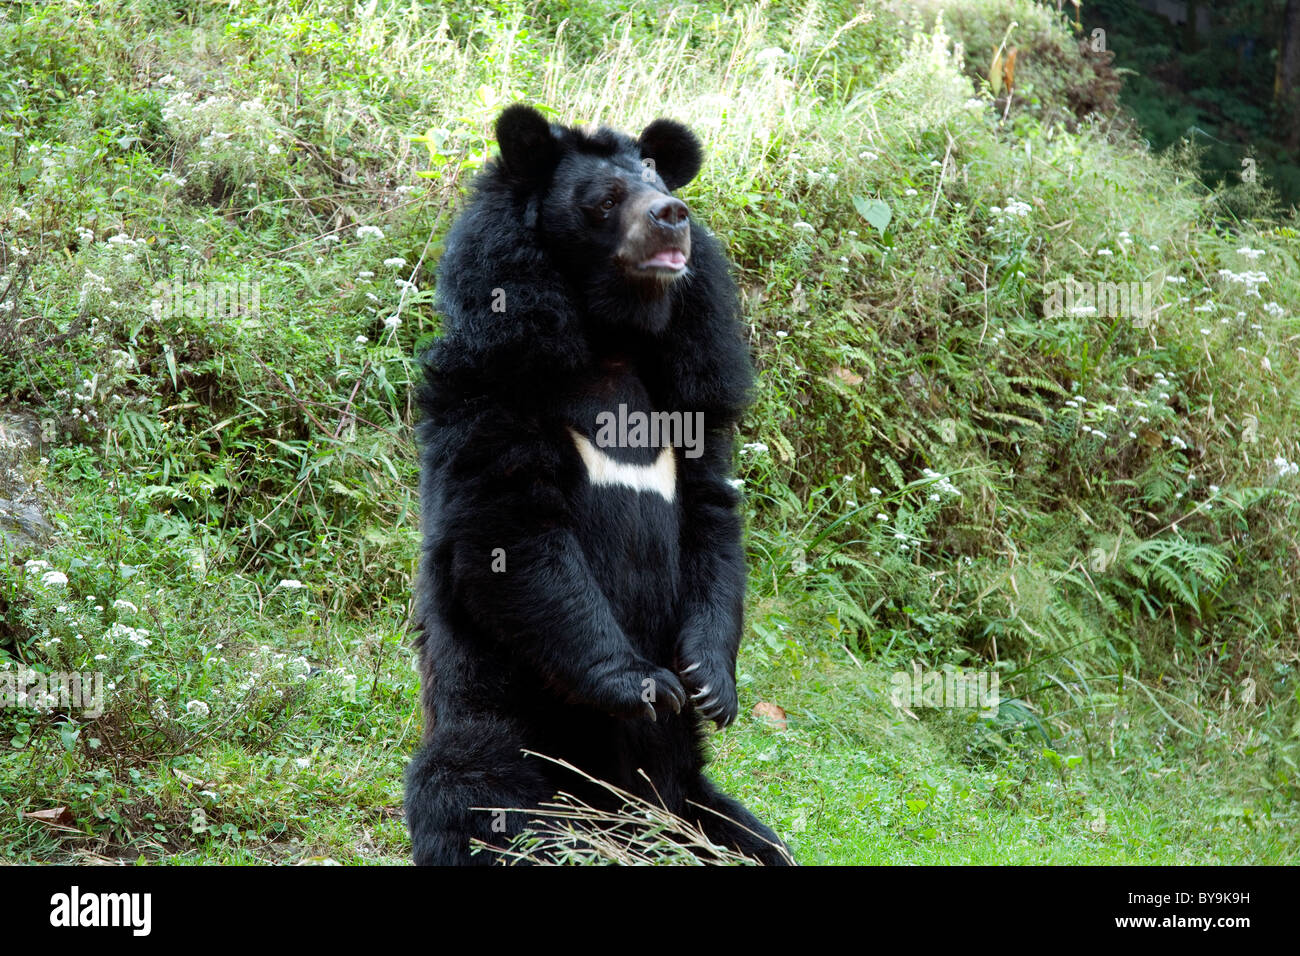 An Asian black bear in its Darjeeling zoo enclosure appears to be begging for food from onlookers Stock Photo